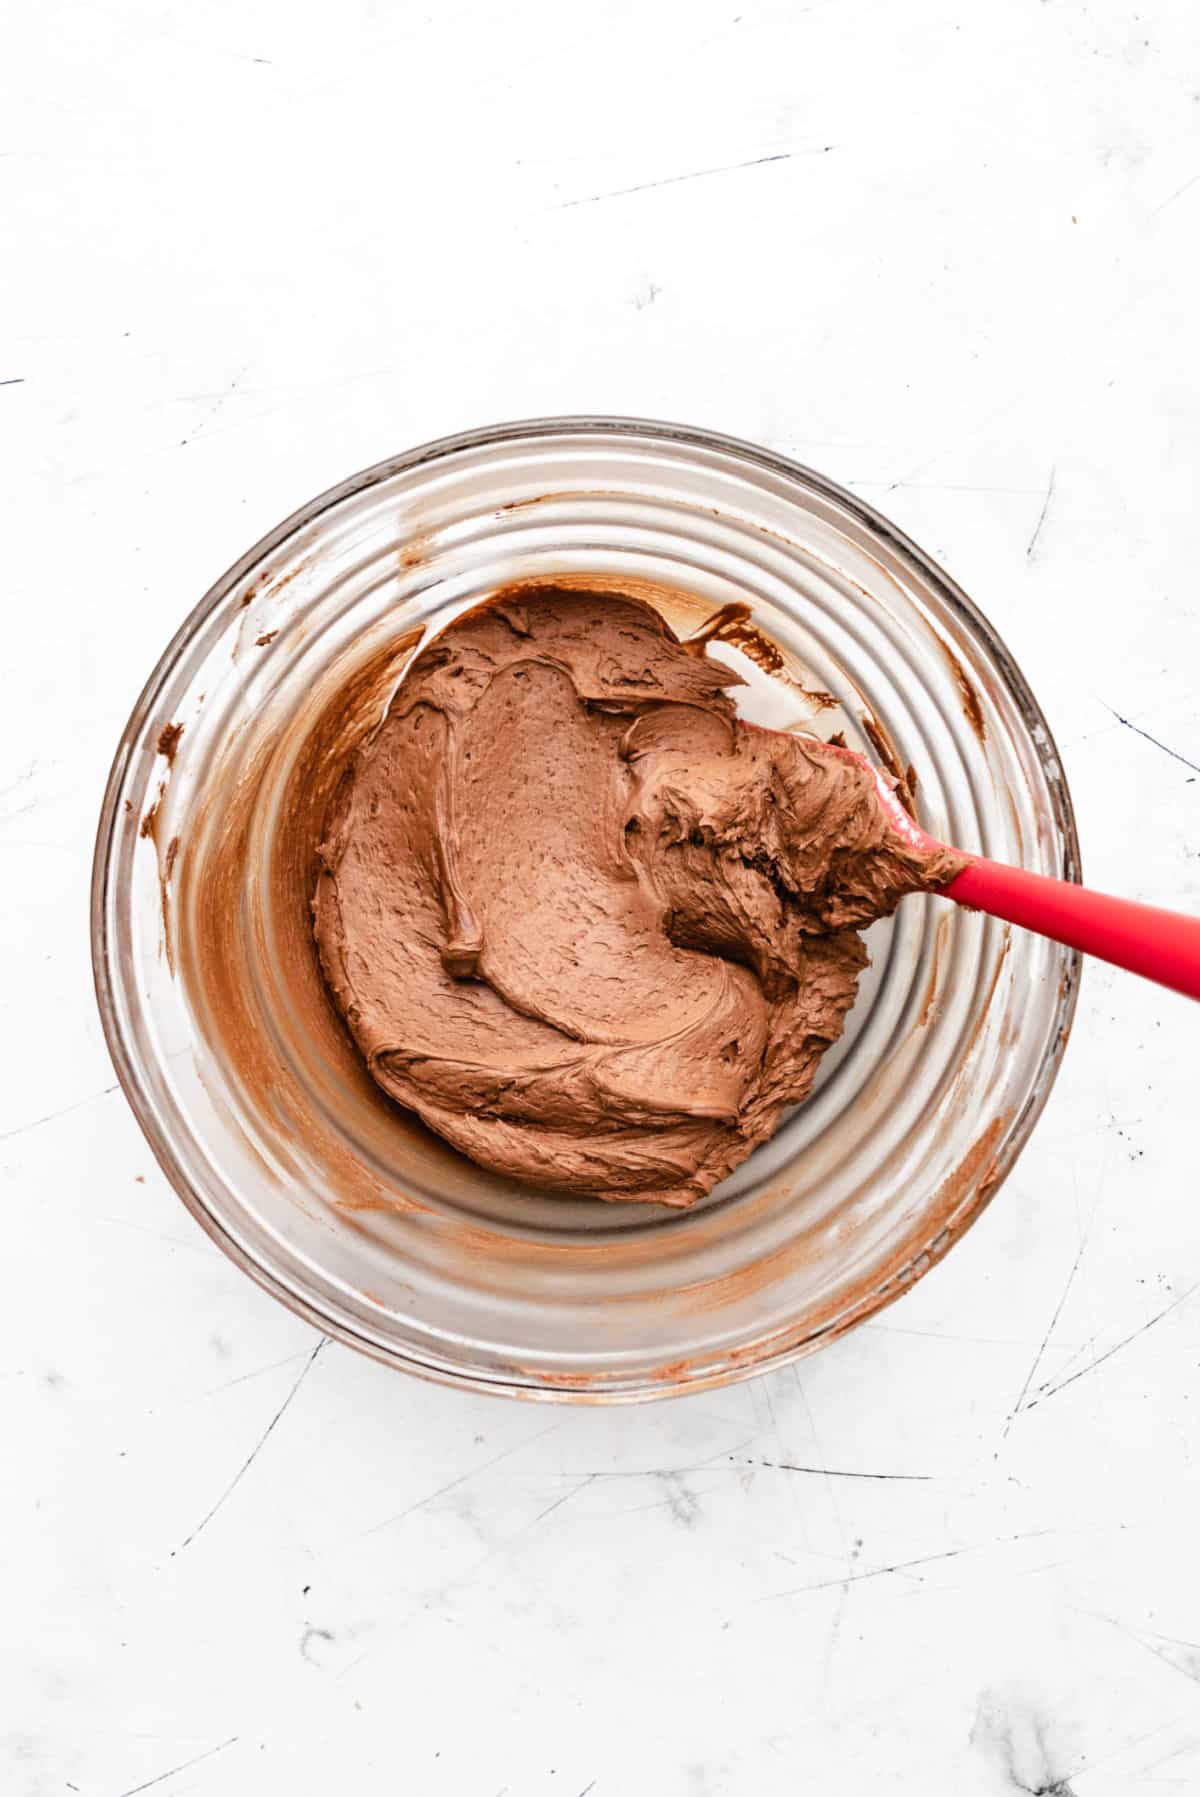 Chocolate buttercream frosting in a glass mixing bowl.